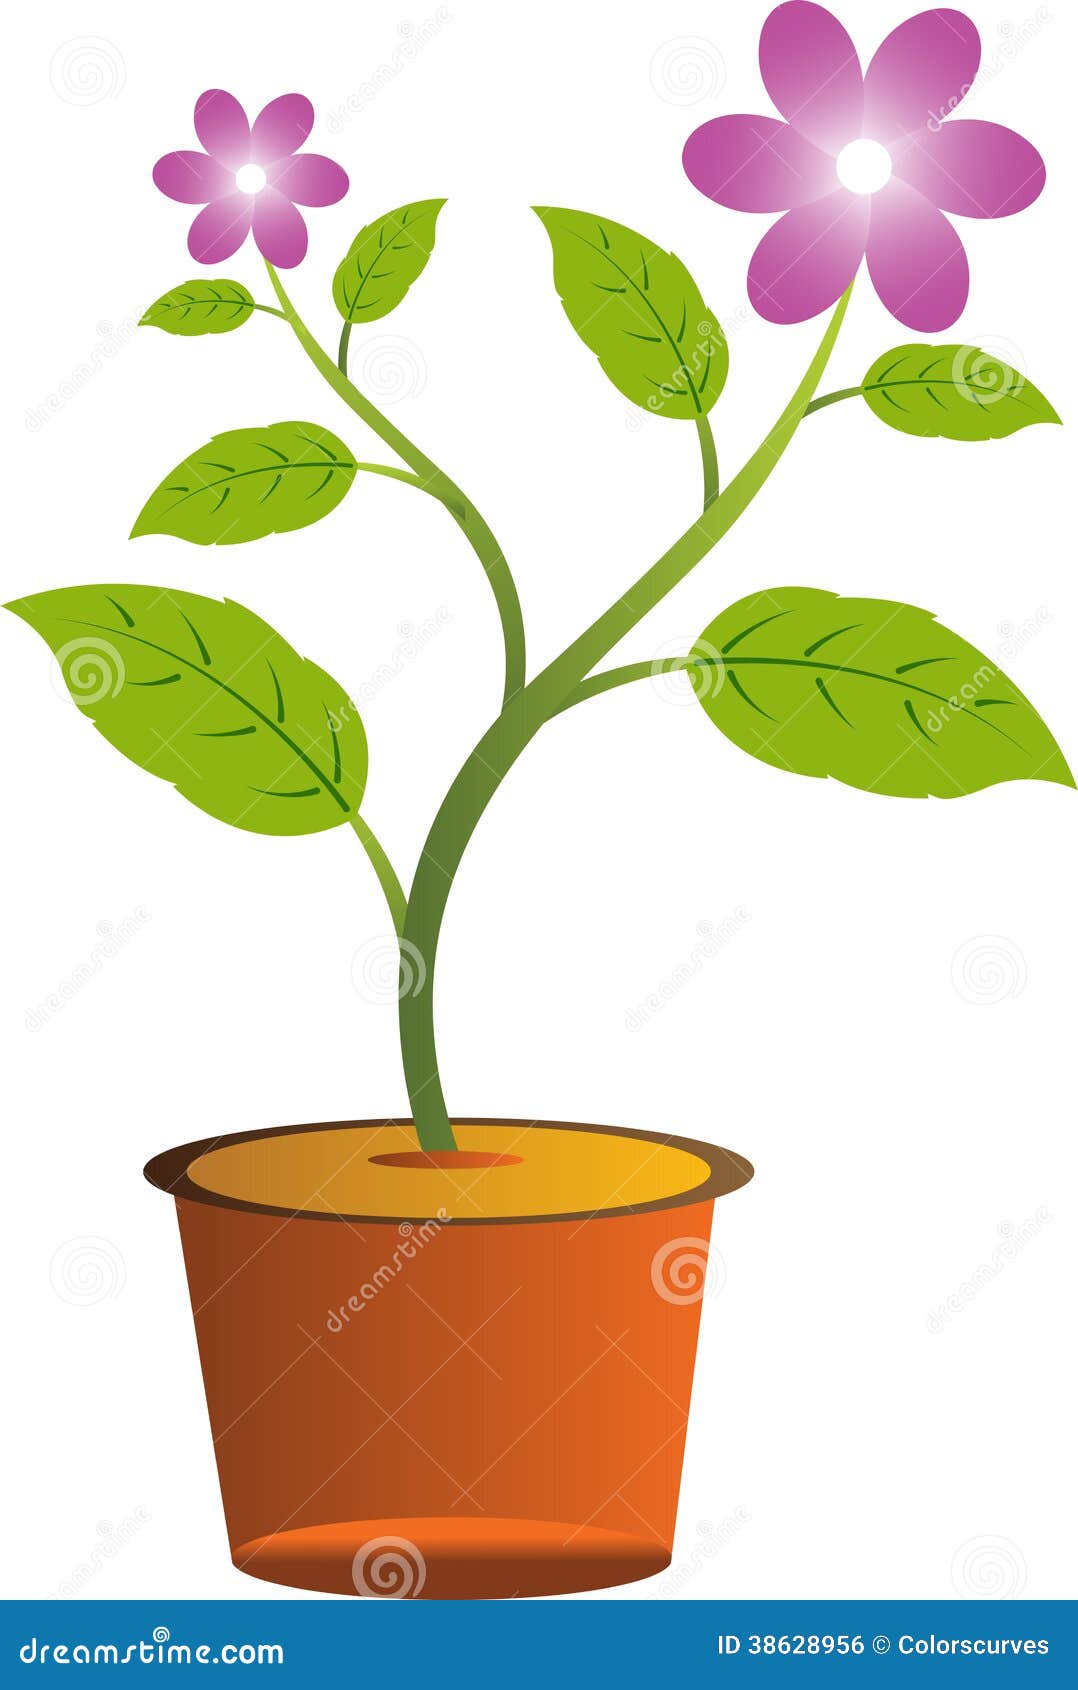 flower with pot